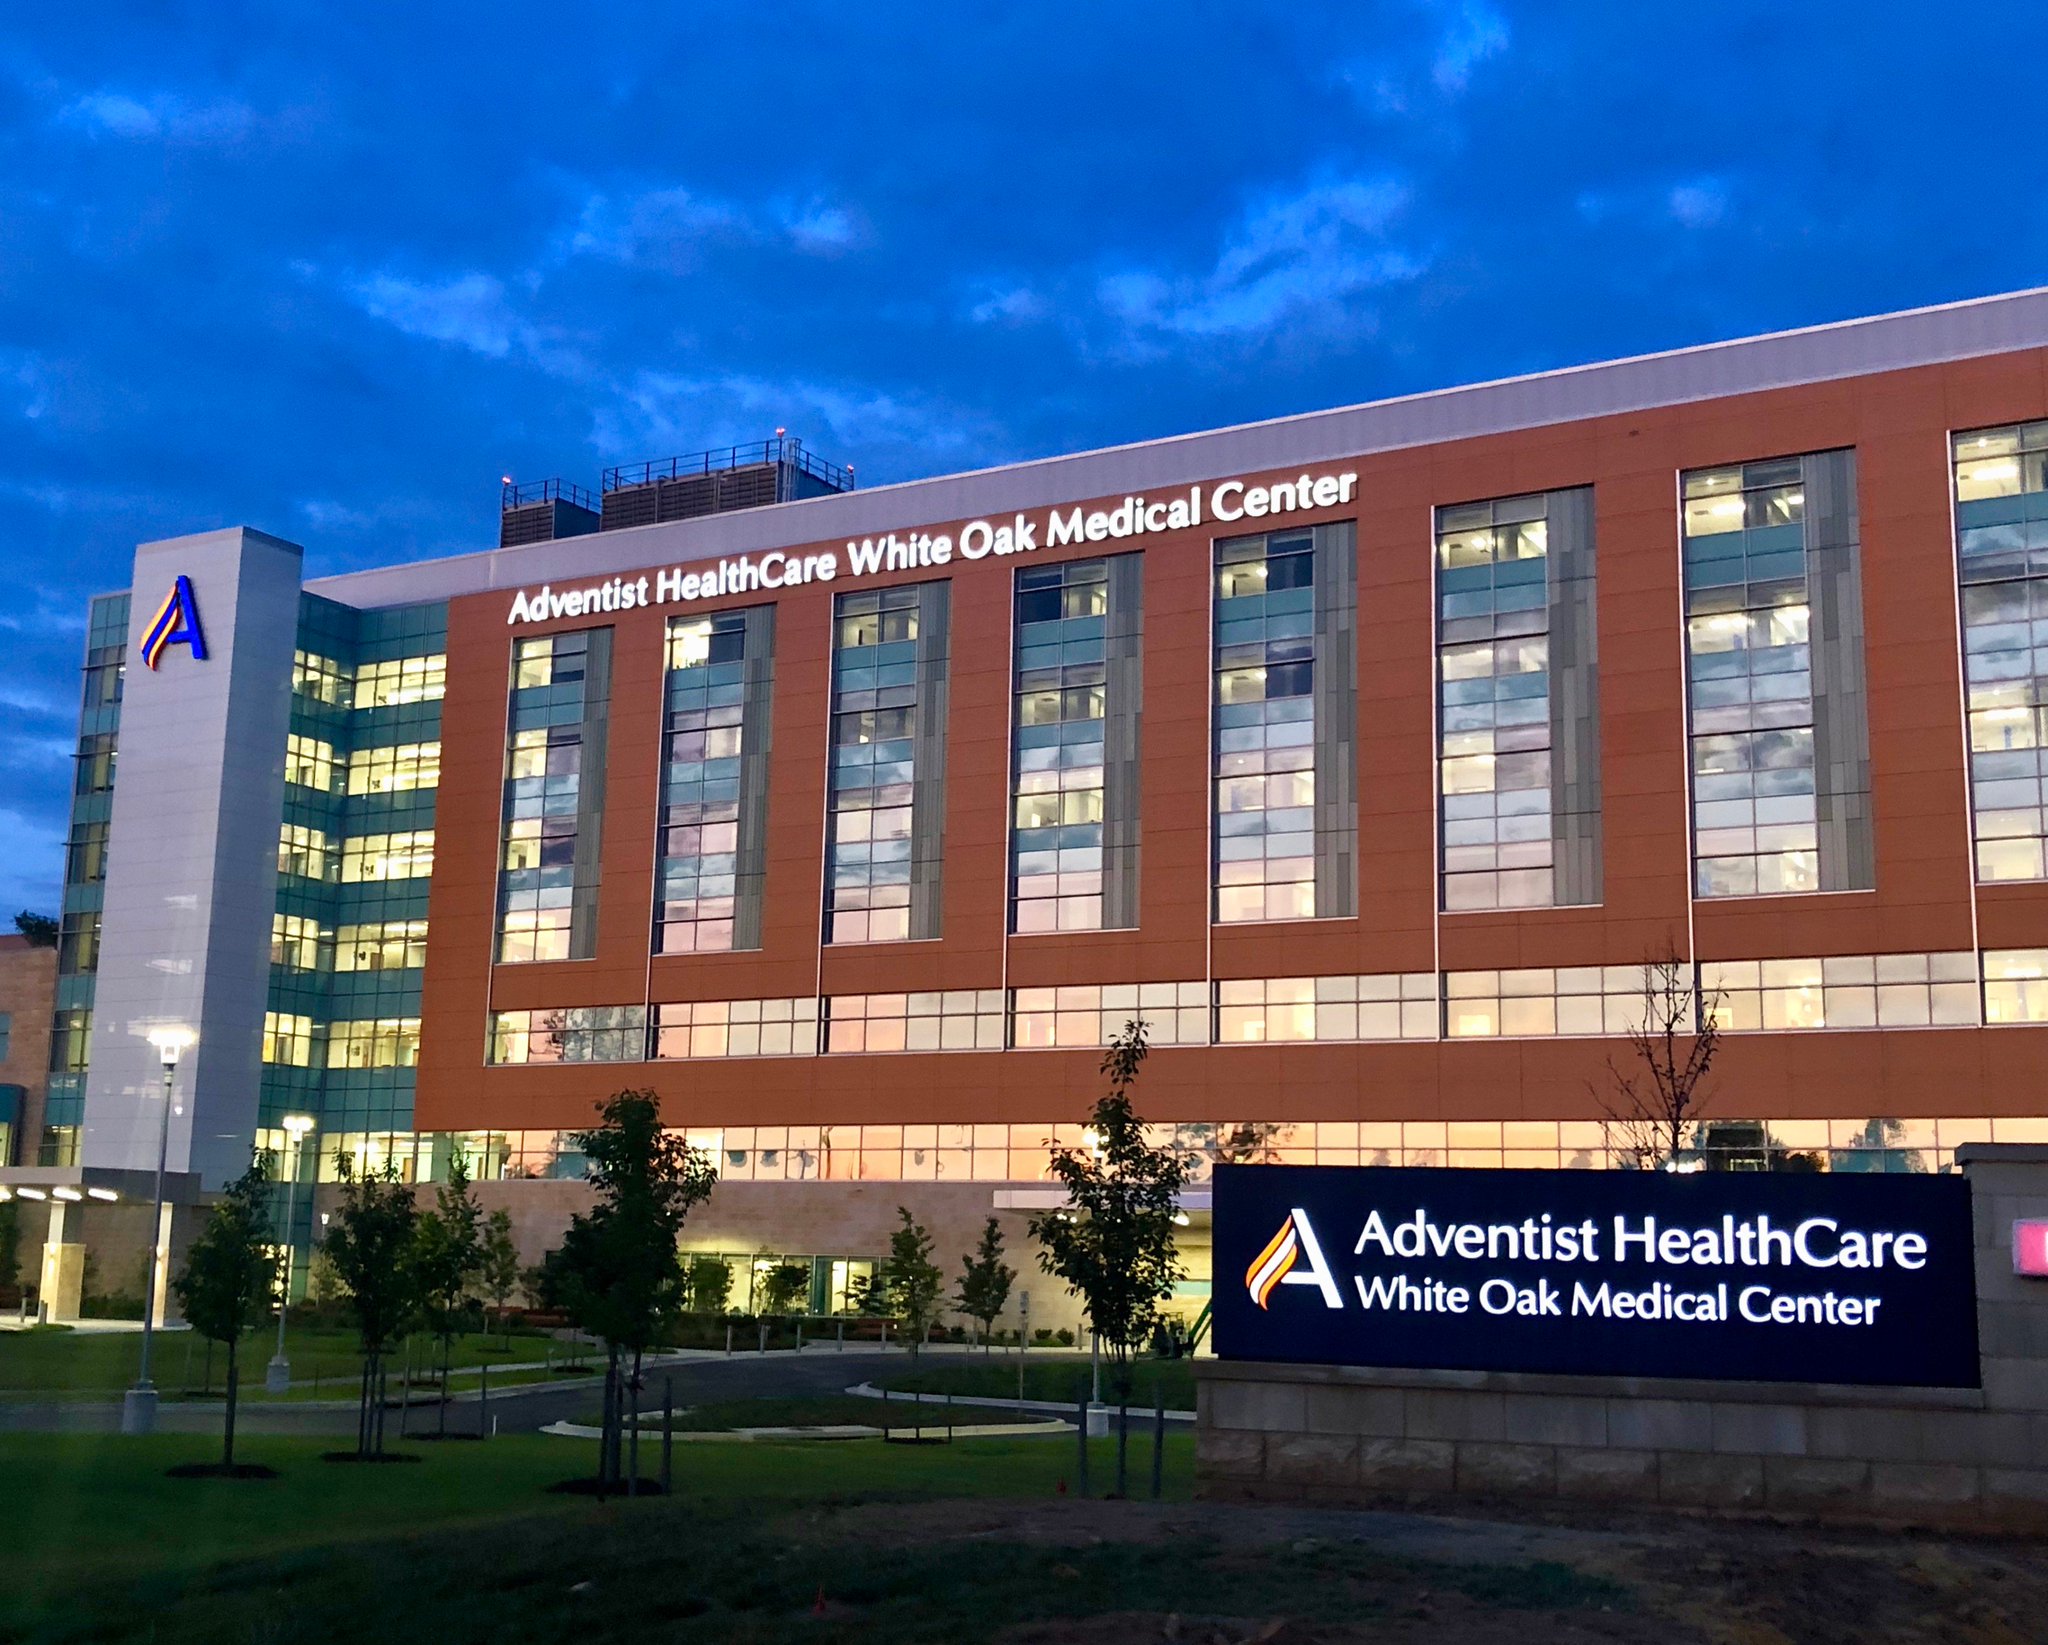 Working at adventist health care capture the best image quality in nuance pdf